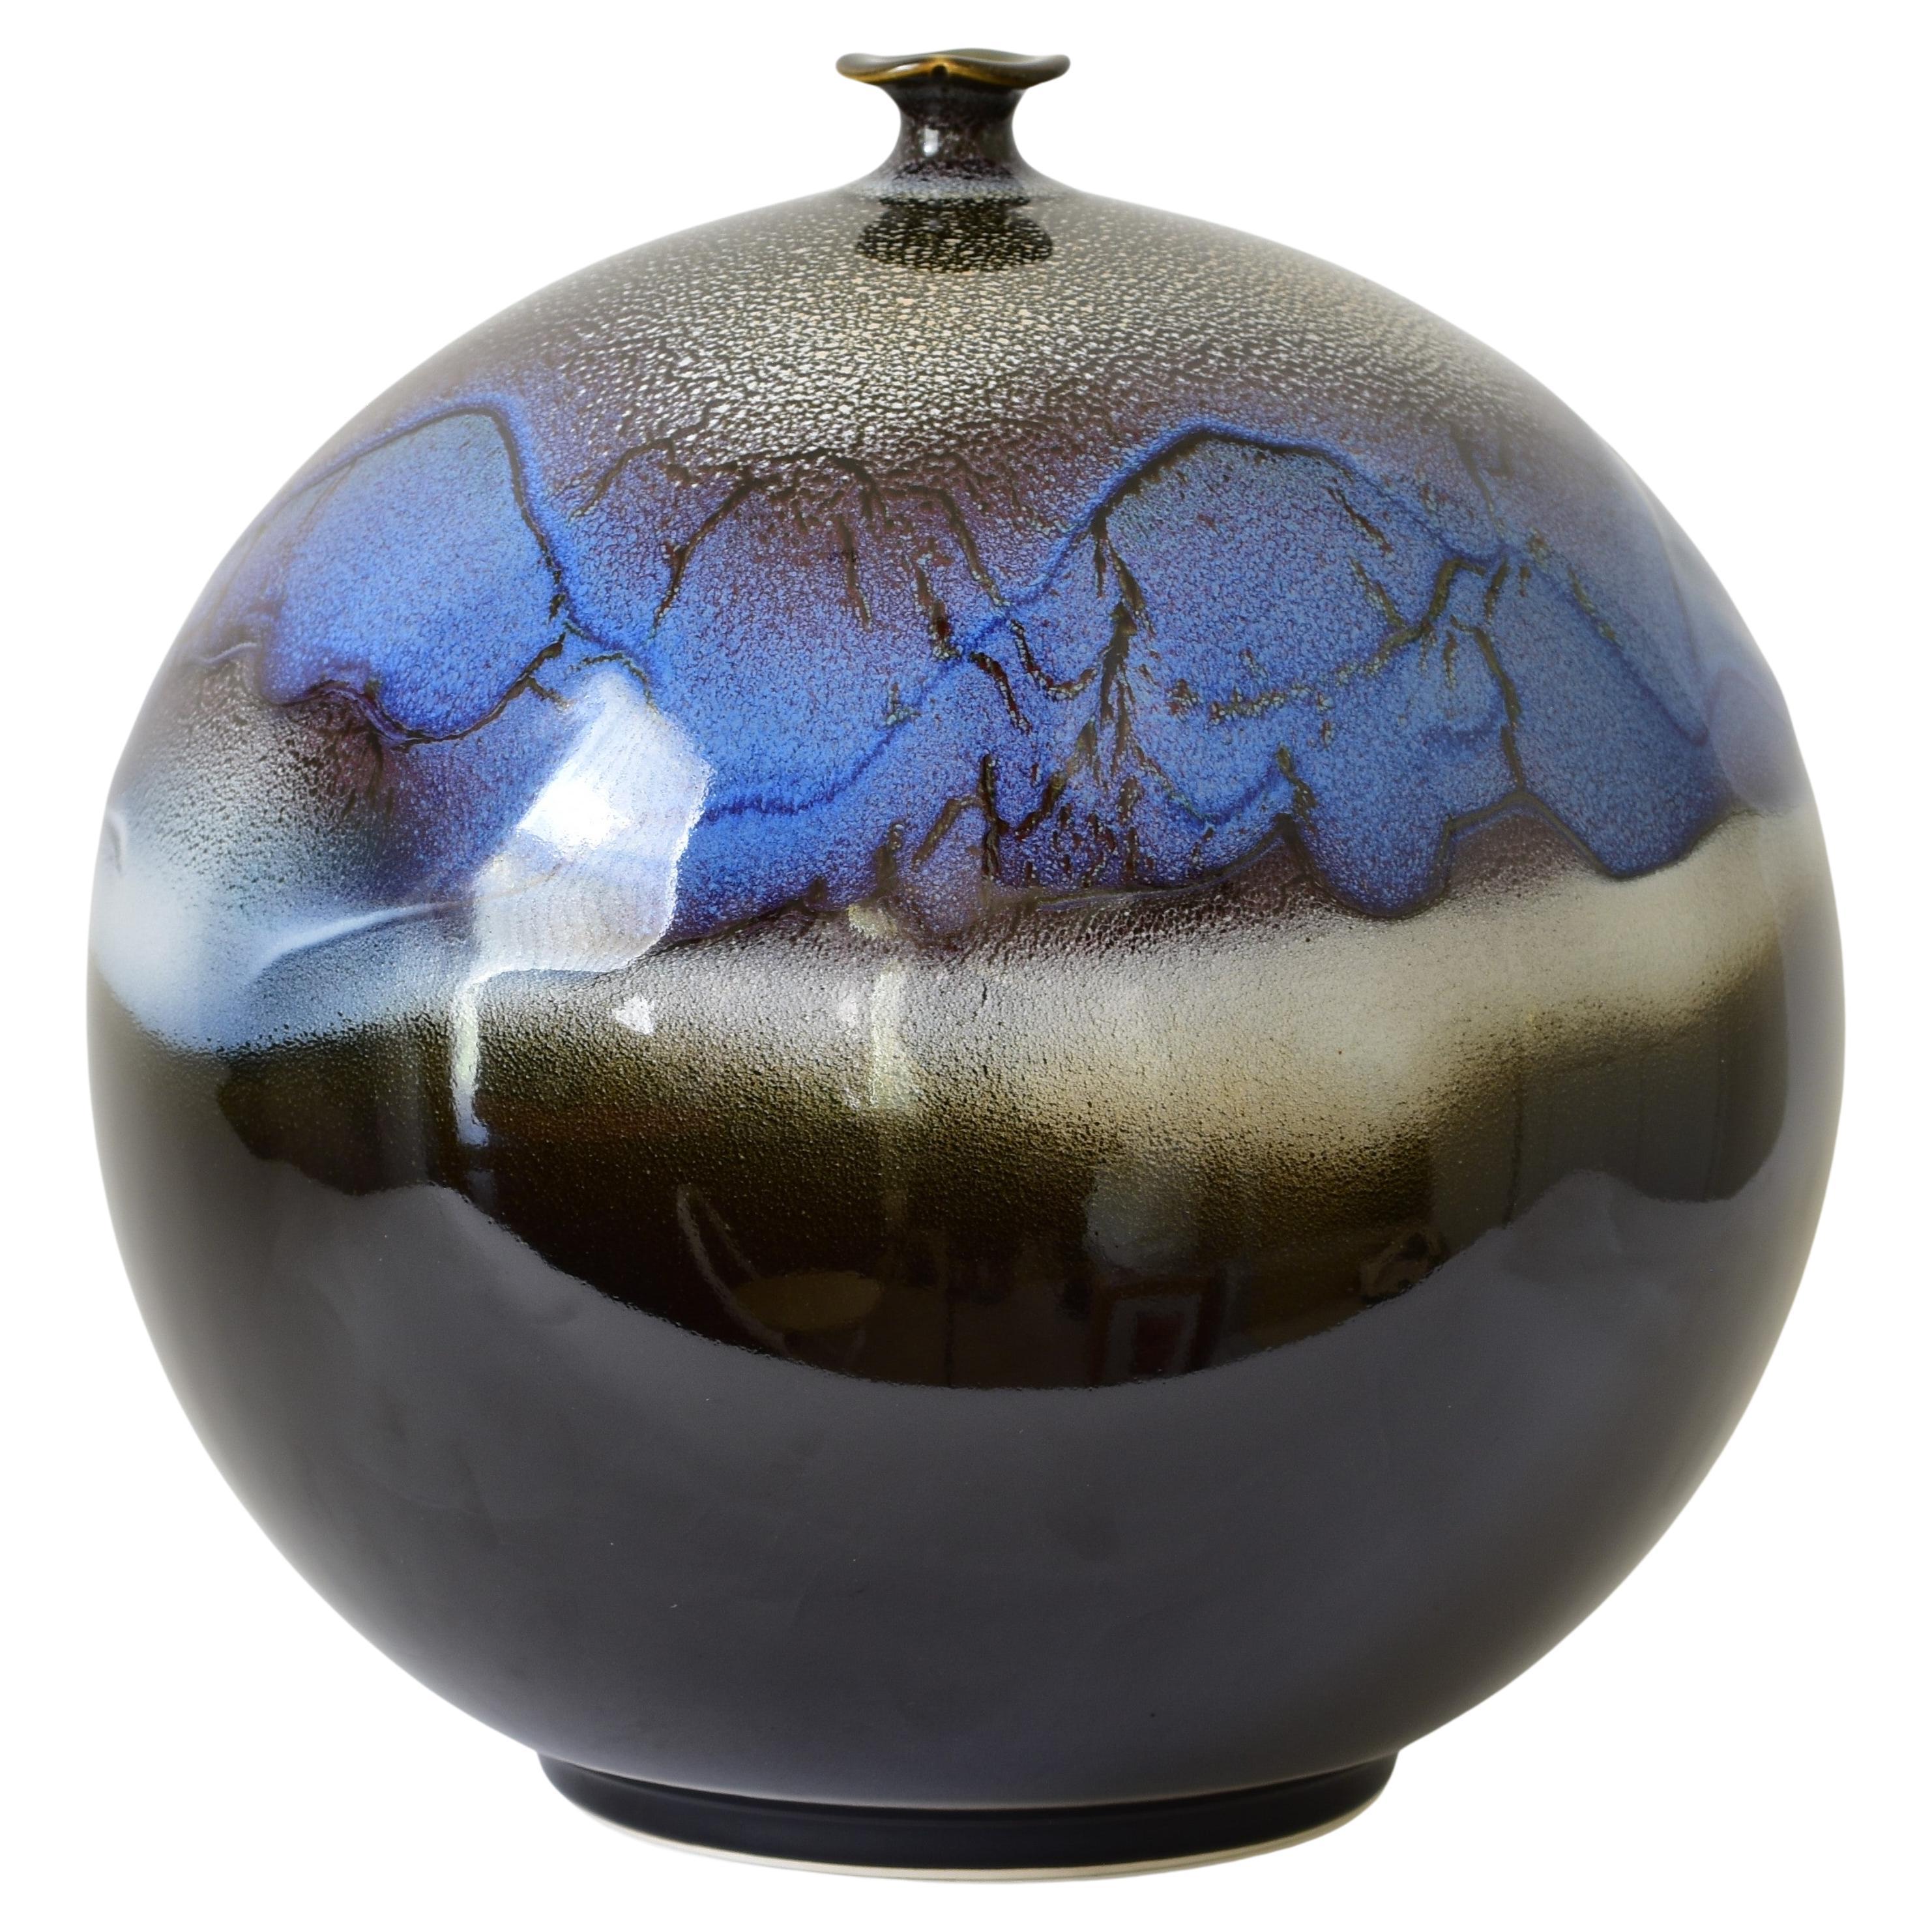 Exquisite museum quality Japanese contemporary hand-glazed decorative porcelain vase in a striking globular shape in blue and black, a mesmerizing masterpiece by highly acclaimed award-winning master artist of the Arita-Imari region of Japan. This